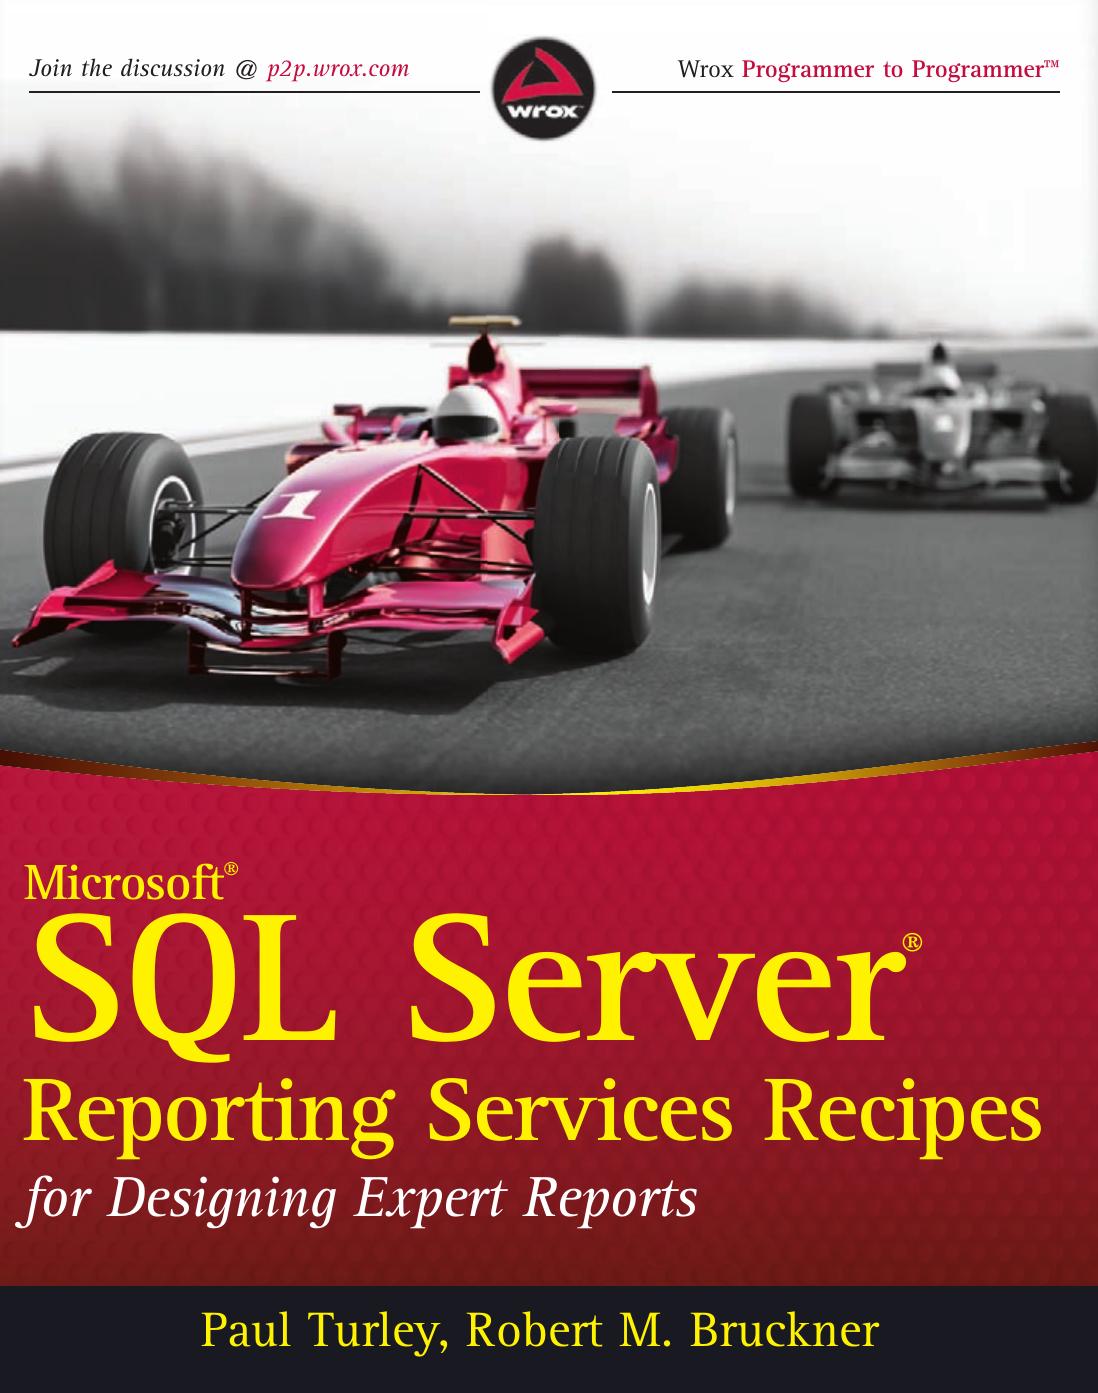 Microsoft SQL Server Reporting Services Recipes: For Designing Expert Reports